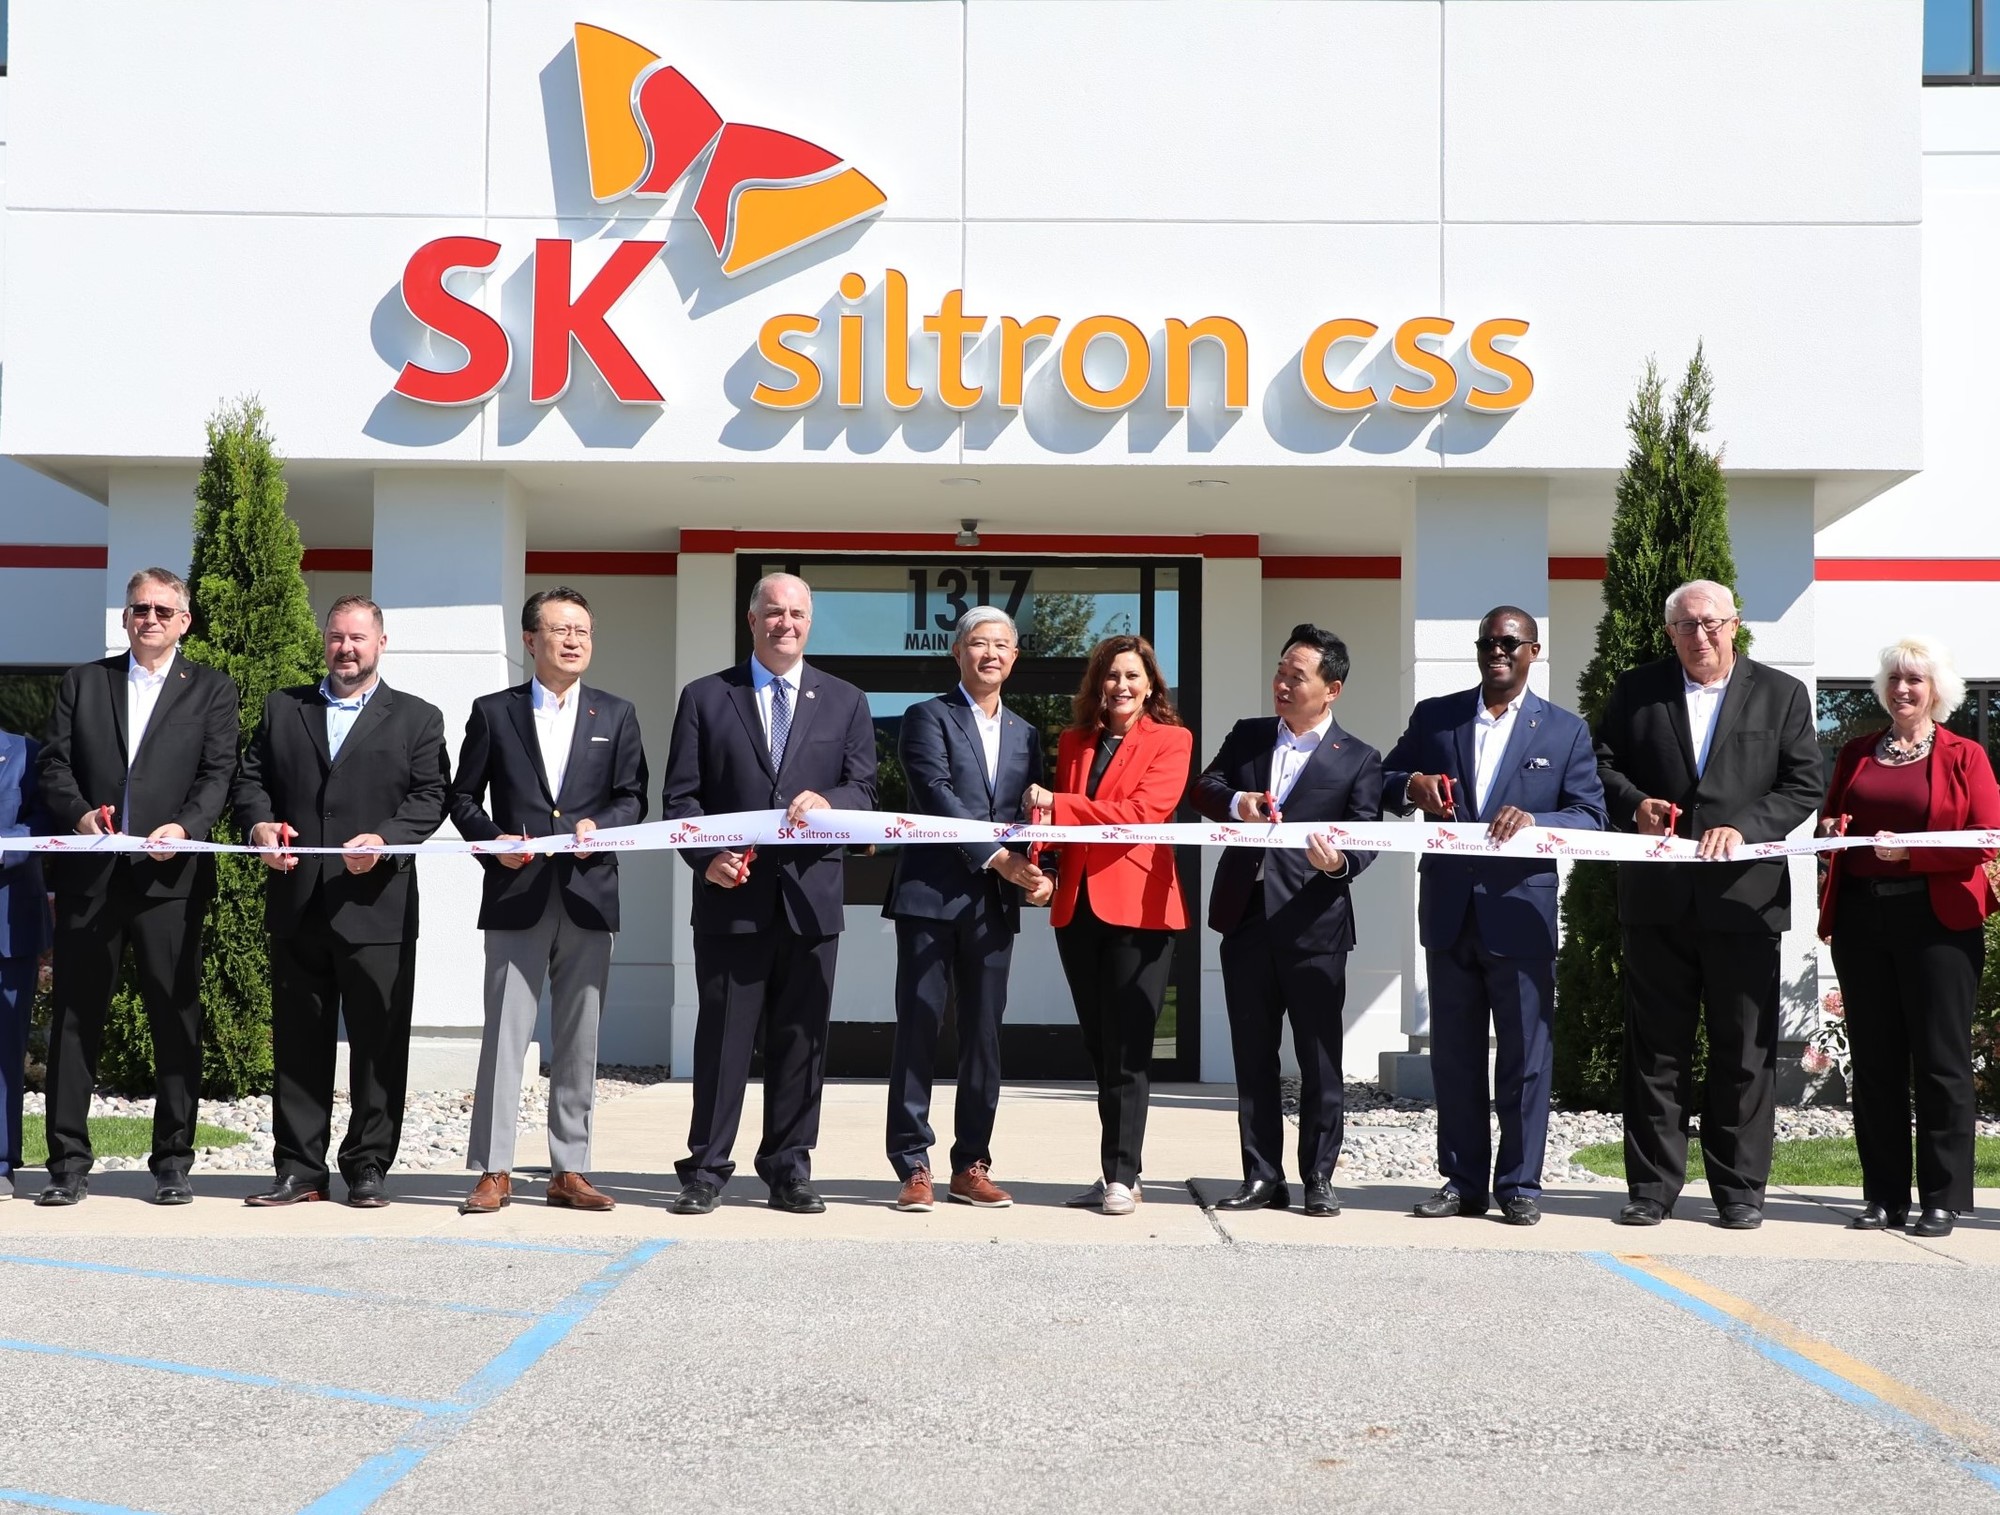 Gov. Whitmer at ribbon cutting of semiconductor wafer manufacturer SK Siltron’s new facility in Bay City